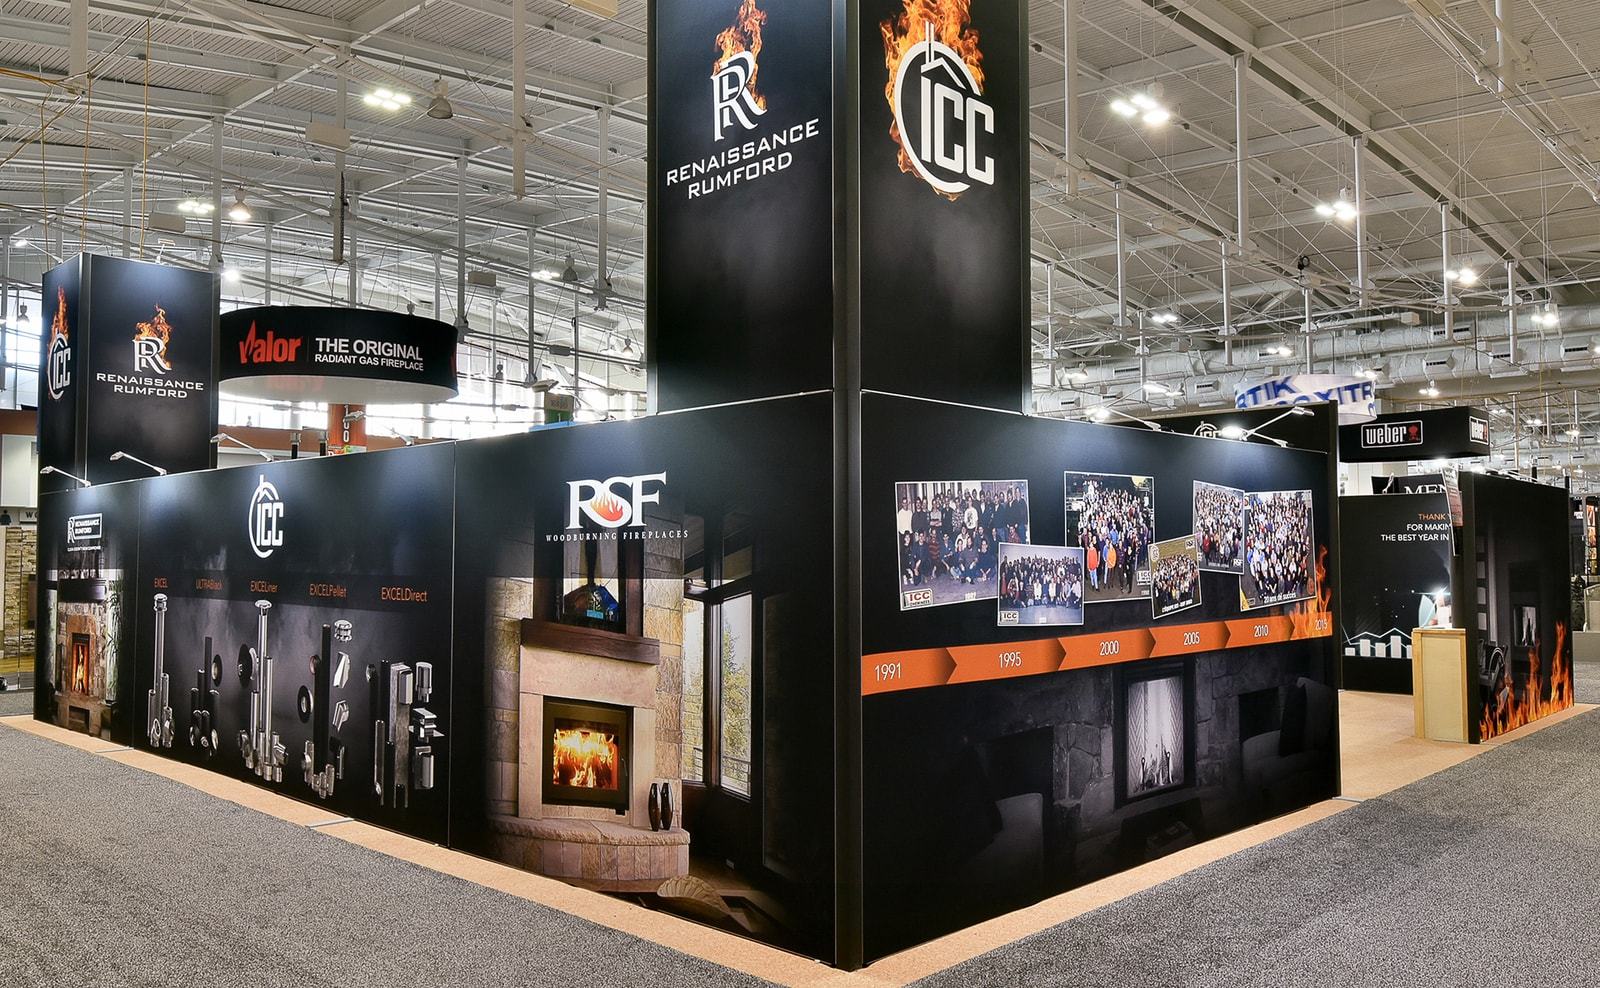 Skyline_ICC_Fireplaces_Tradeshow-Booth